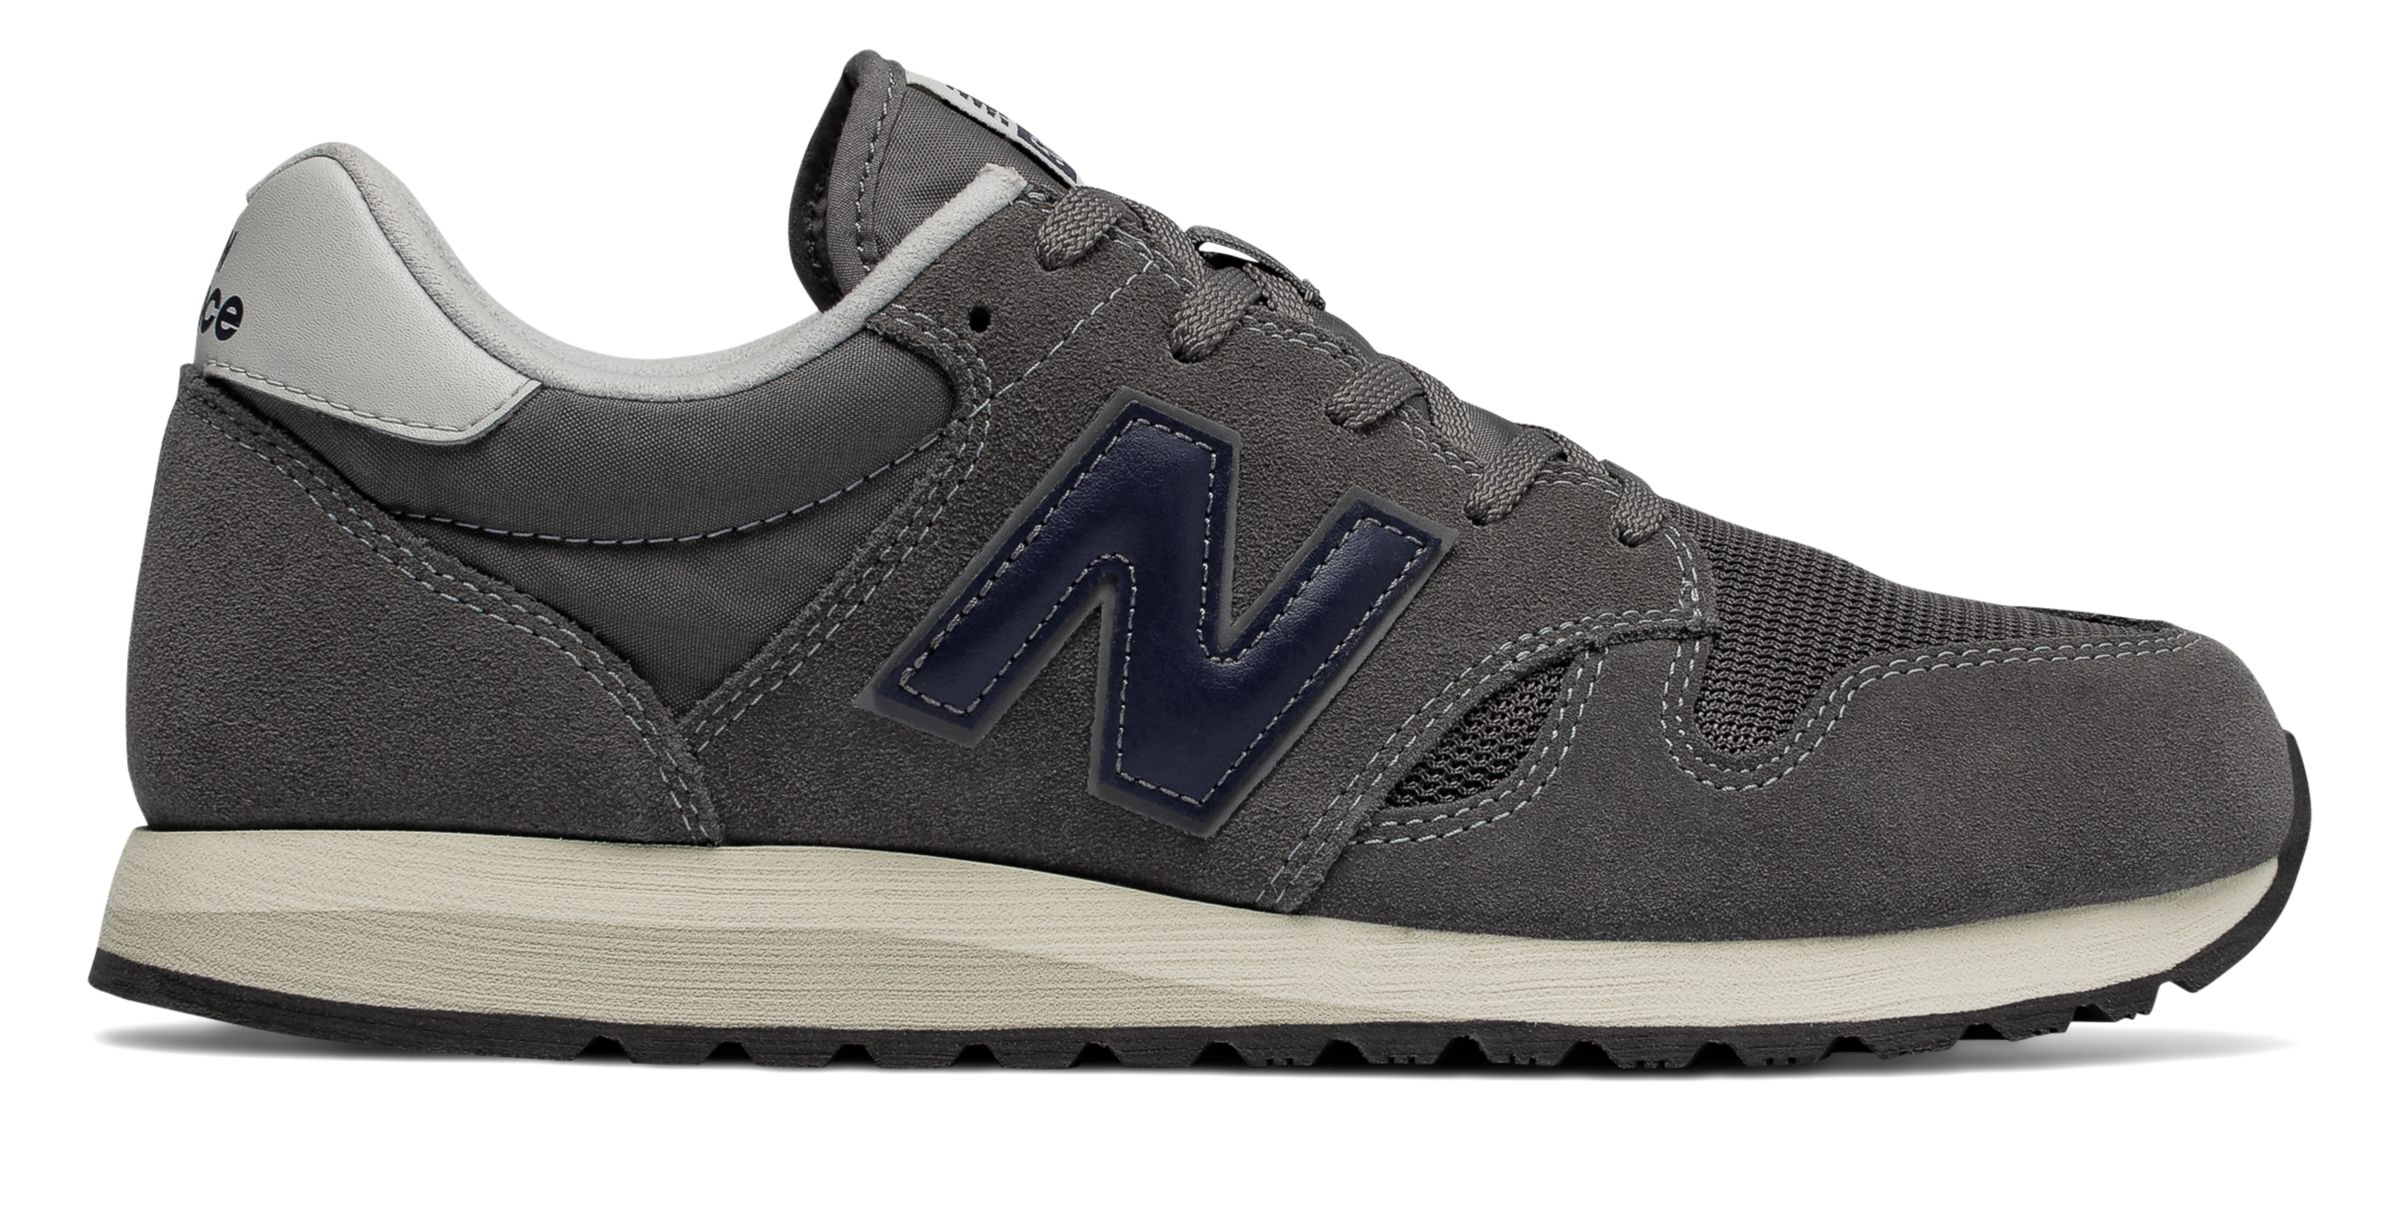 New Balance U520-ST on Sale - Discounts Up to 50% Off on U520CL at Joe's New  Balance Outlet